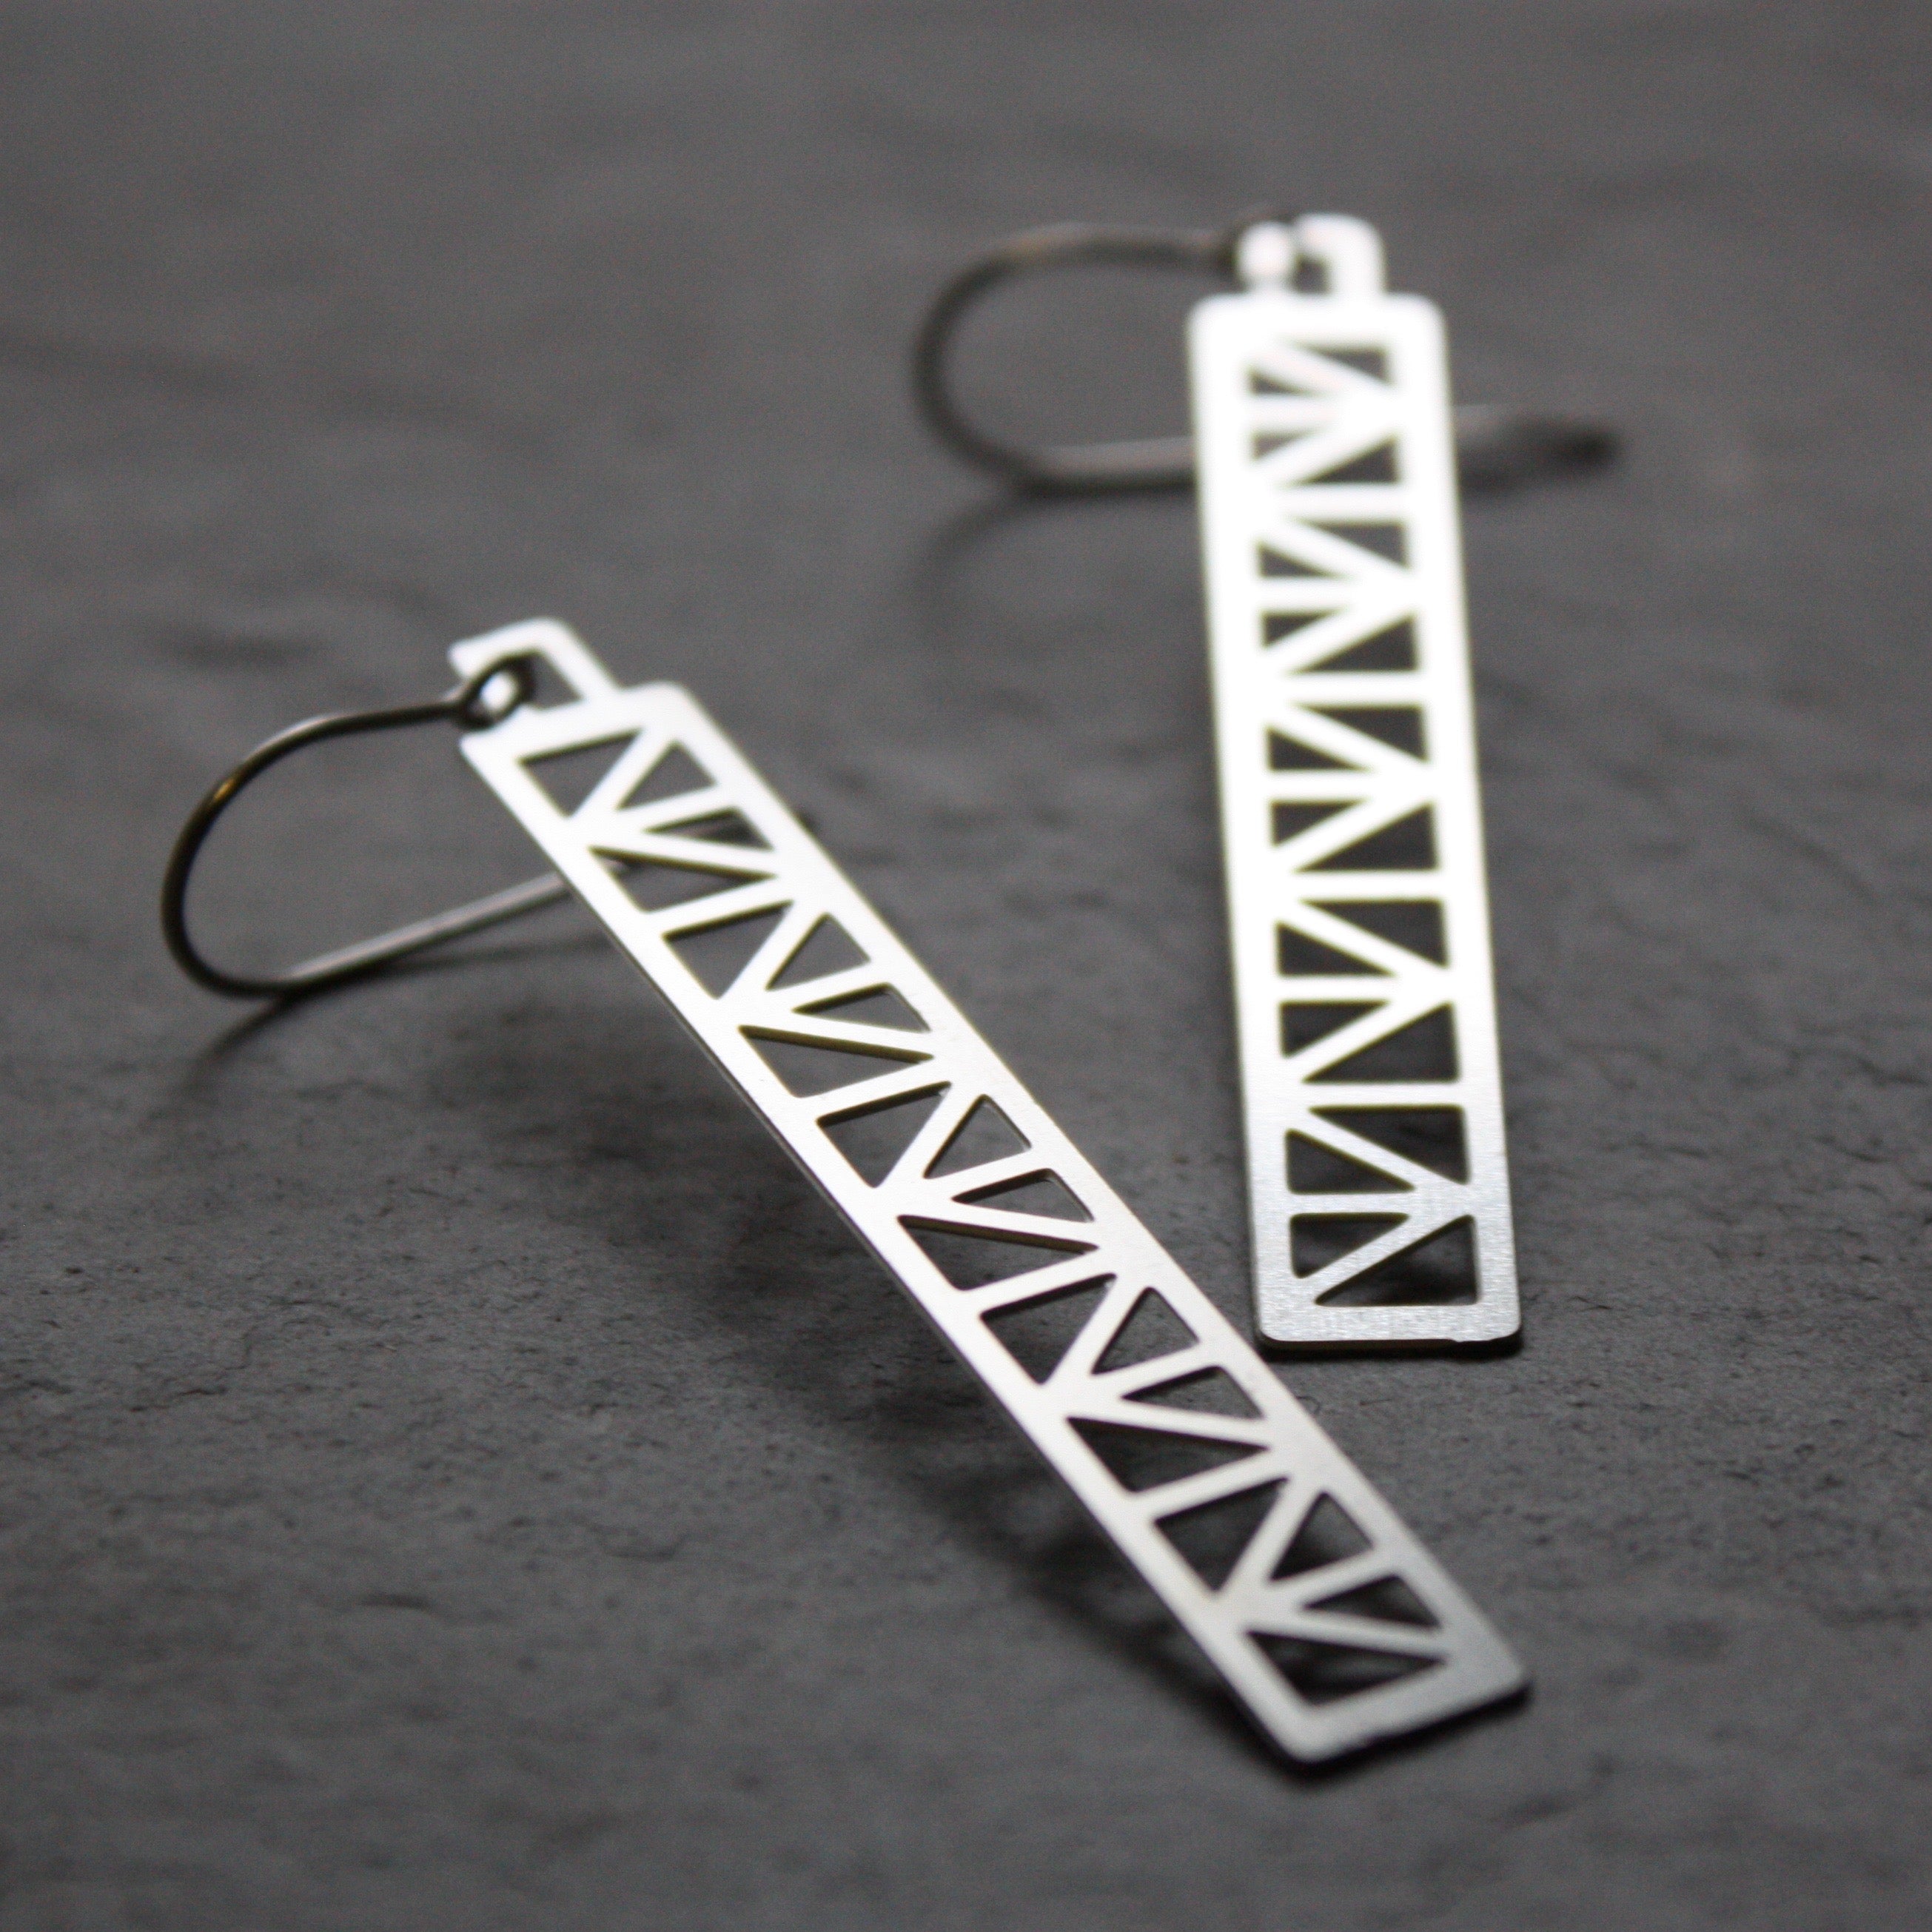 Peace Truss Earring design by Audra Azoury